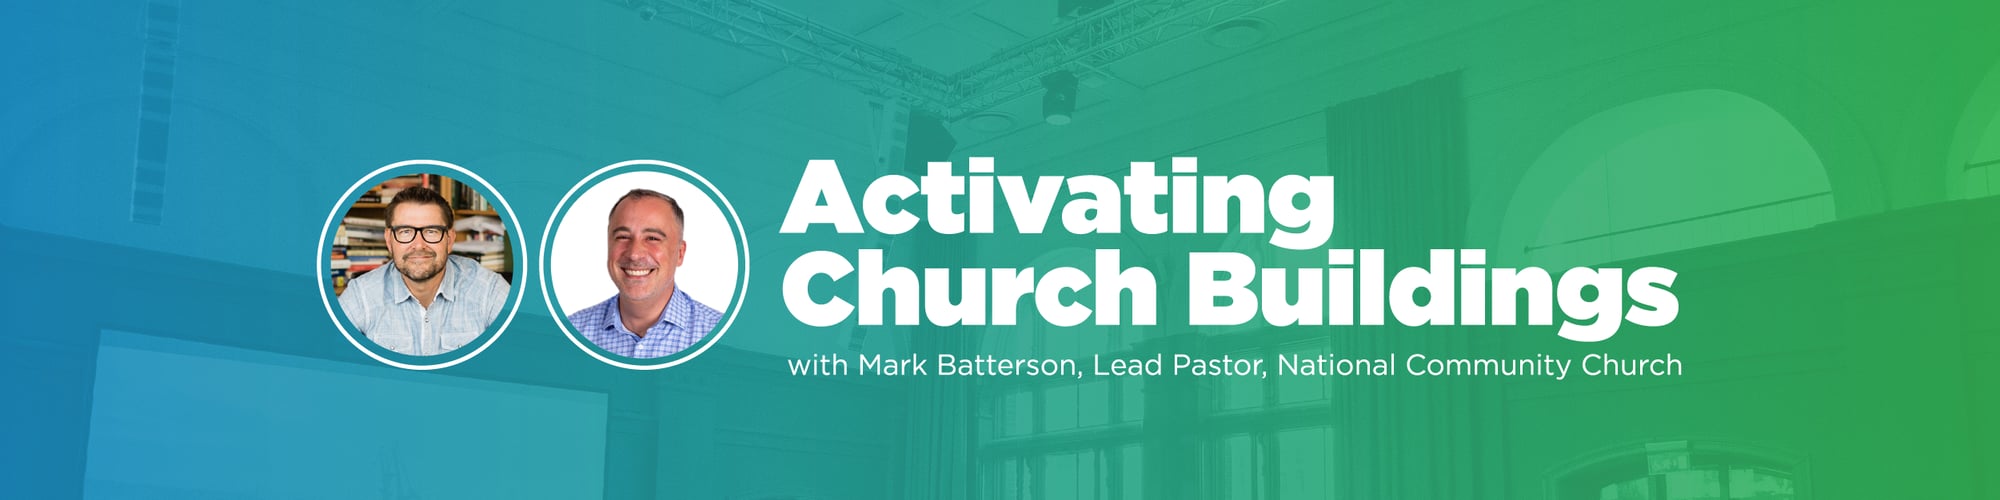 Activating Church Buildings - Batterson_Email Header